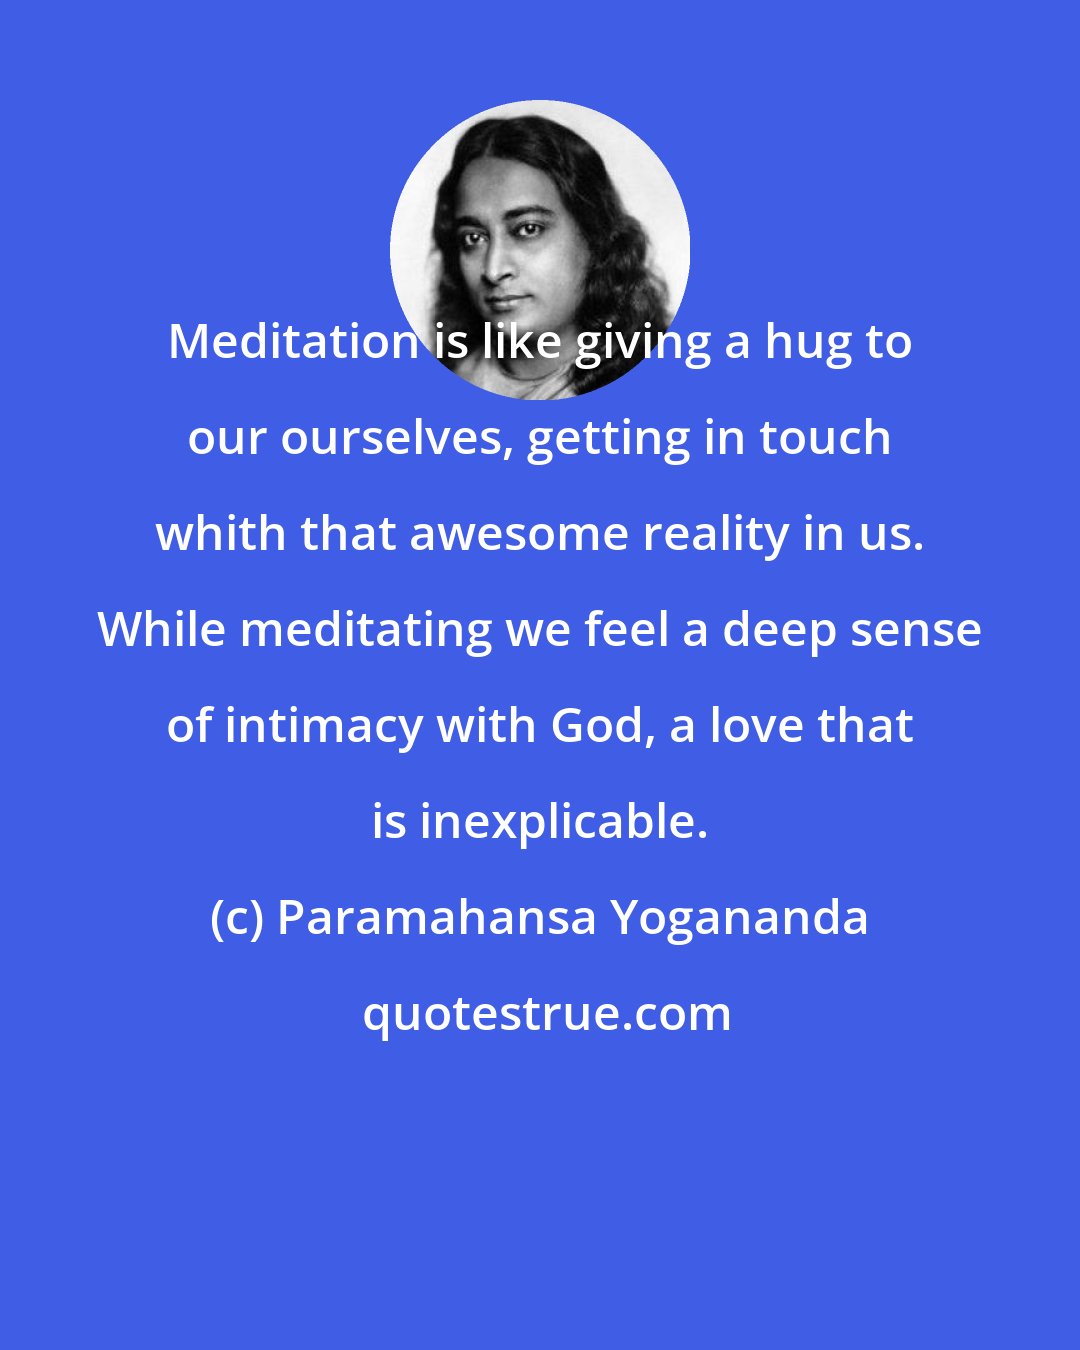 Paramahansa Yogananda: Meditation is like giving a hug to our ourselves, getting in touch whith that awesome reality in us. While meditating we feel a deep sense of intimacy with God, a love that is inexplicable.